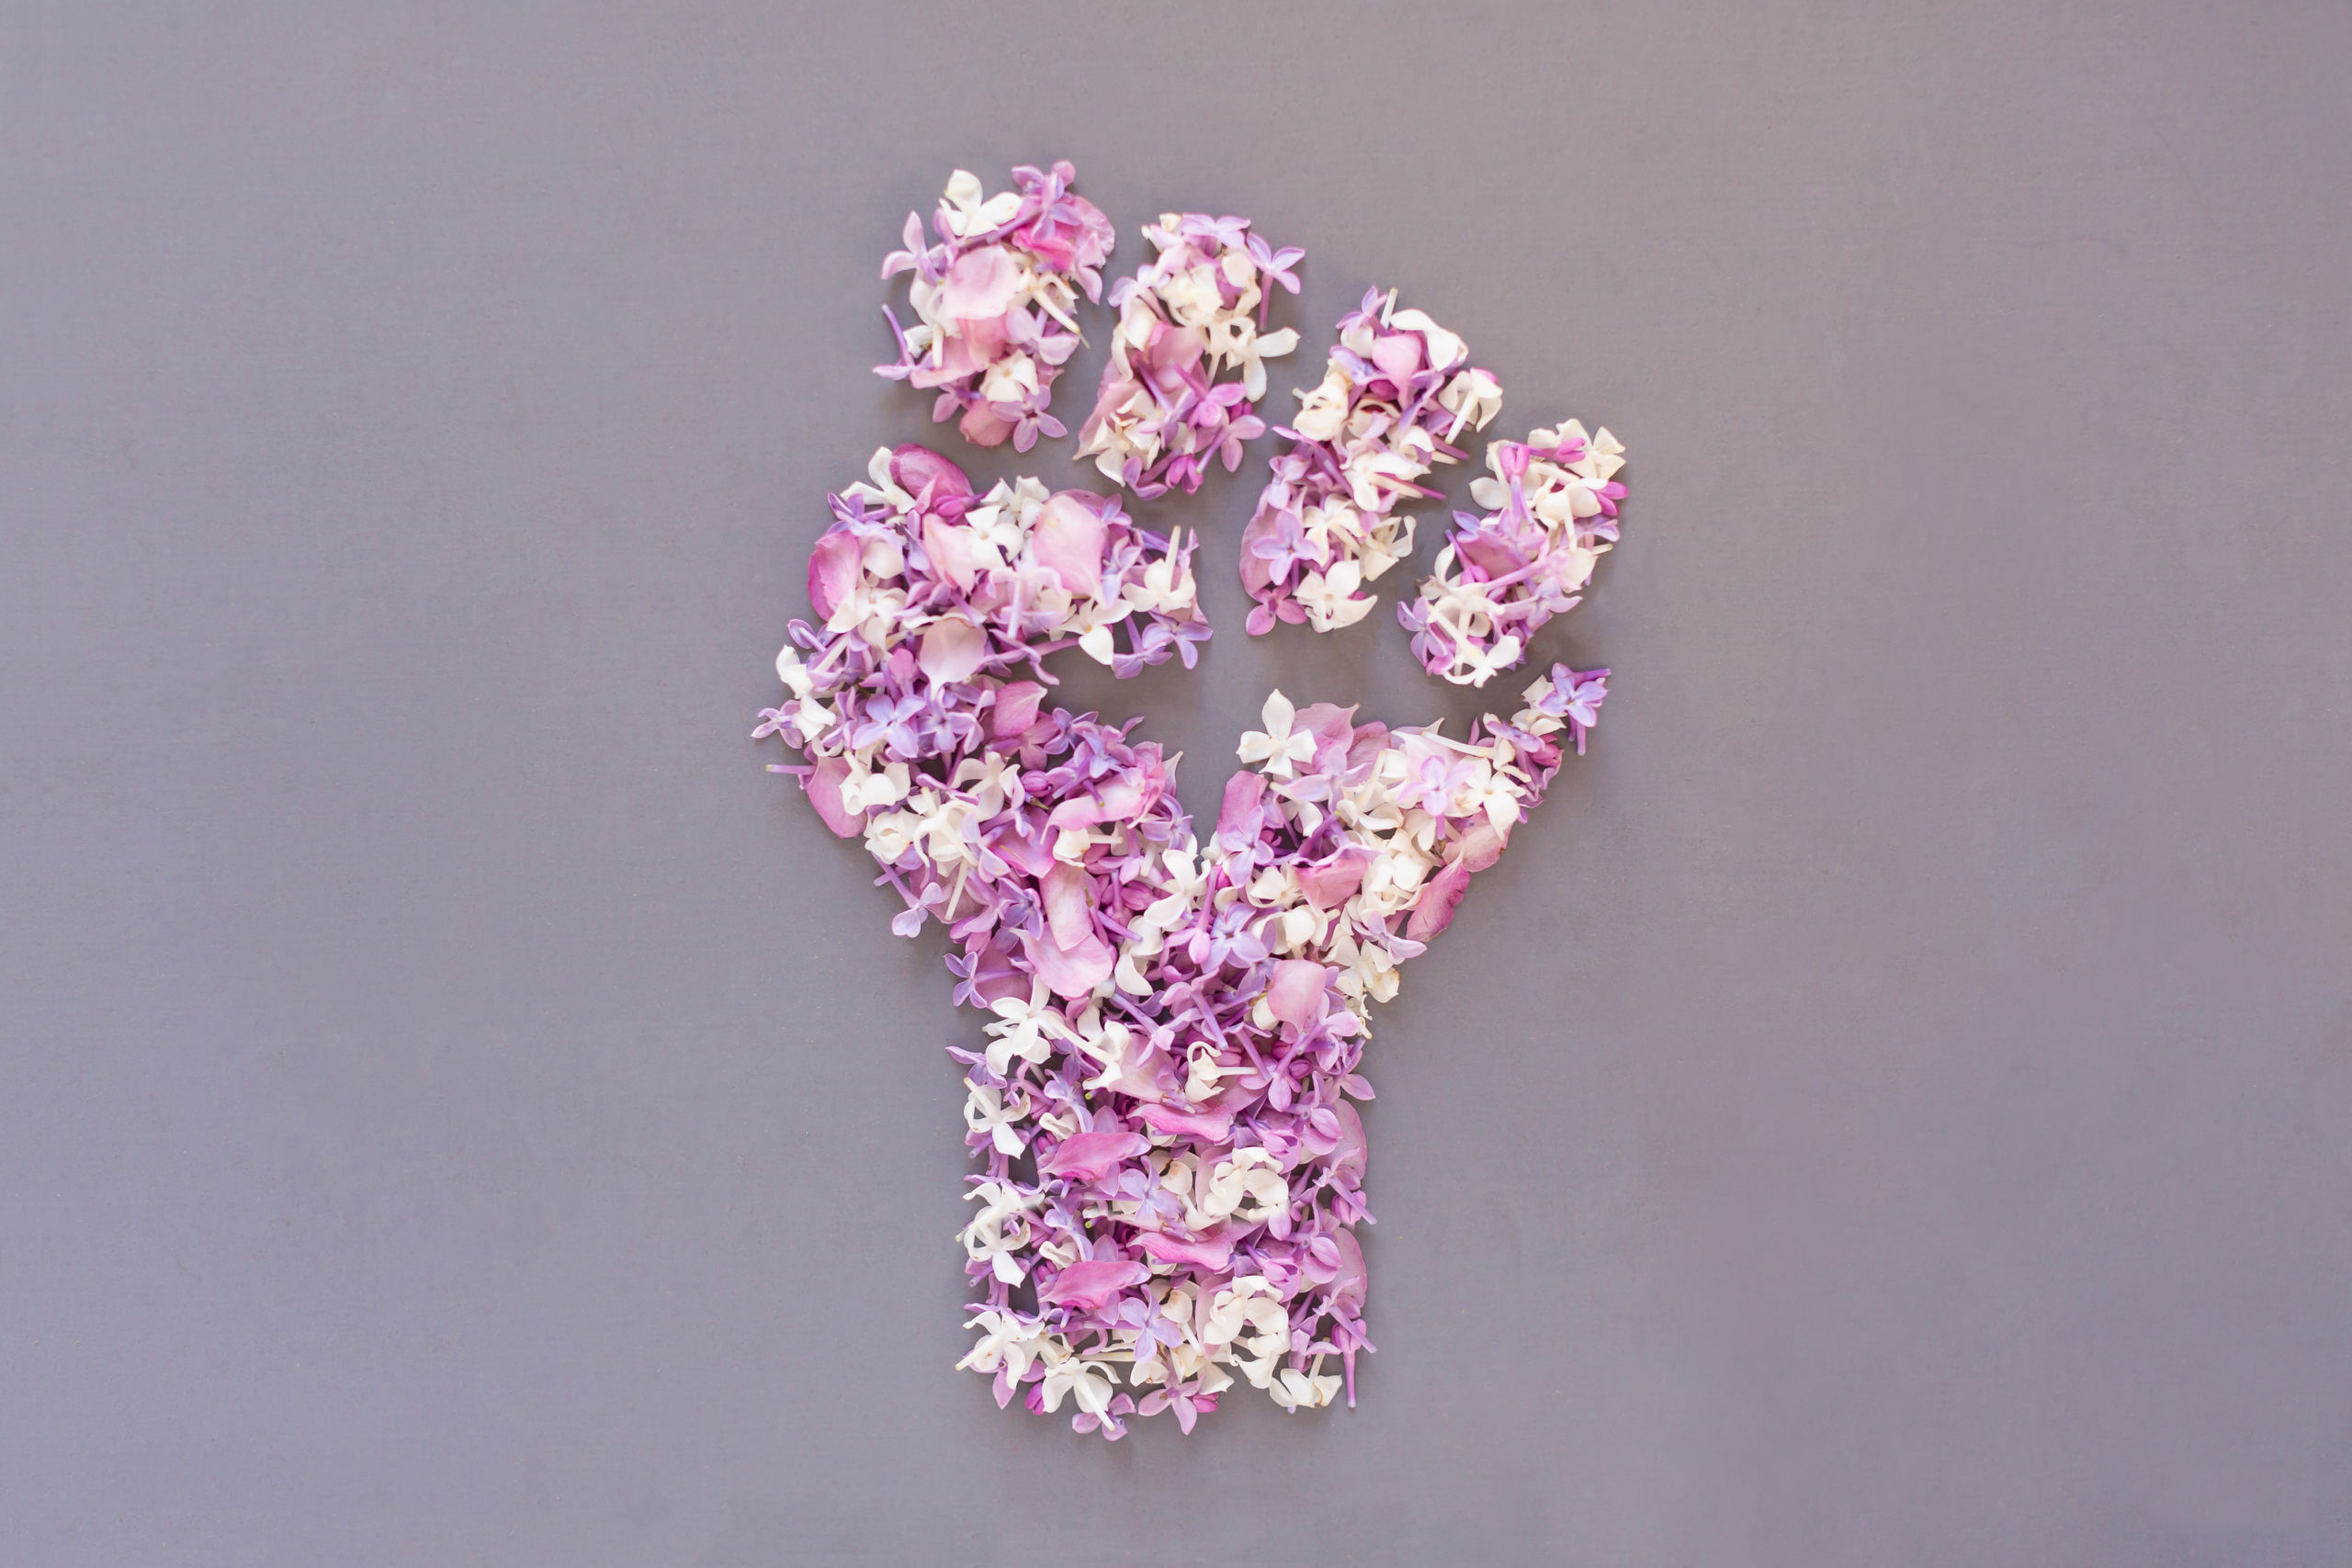 DIGITAL BLOOMS JUNE 2020 | FREE DESKTOP WALLPAPER | June 2020's Digital Blooms were created in solidarity with the Black Lives Matter anti-racism movement, using multi-coloured flowers foraged from blooming trees to form a raised fist signifying unity, diversity, support, strength and the beauty of change | Free equality Floral Tech Wallpaper | Free June 2020 Flower Tech Wallpapers | JustineCelina Spring 2020 Digital Blooms | Lilac Tech Wallpaper // JustineCelina.com